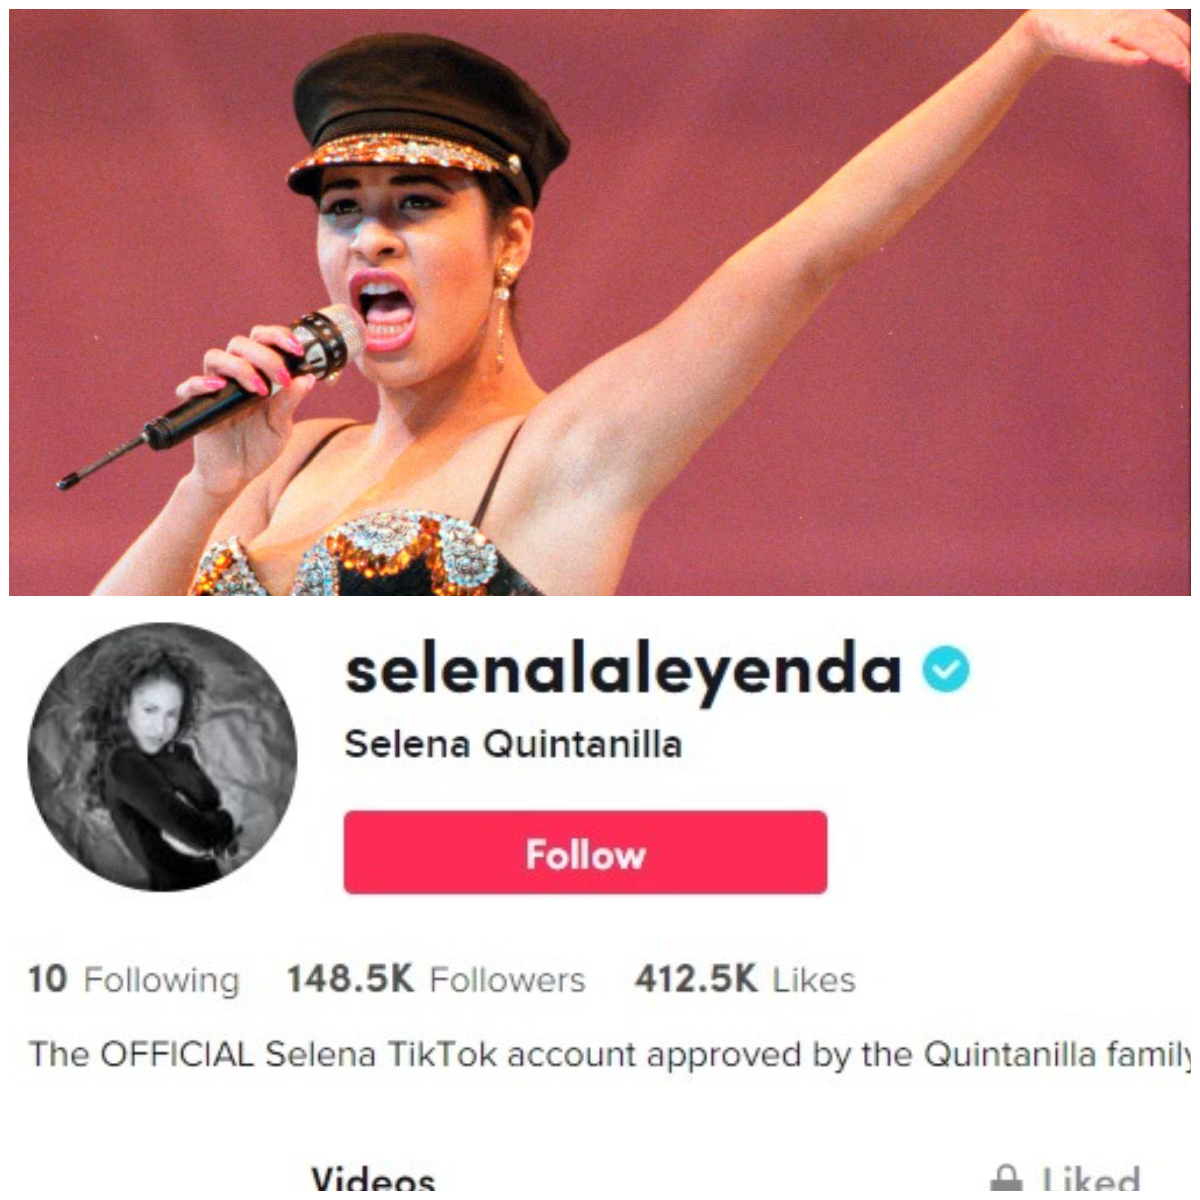 Selena is officially on TikTok, and a special broadcast is planned